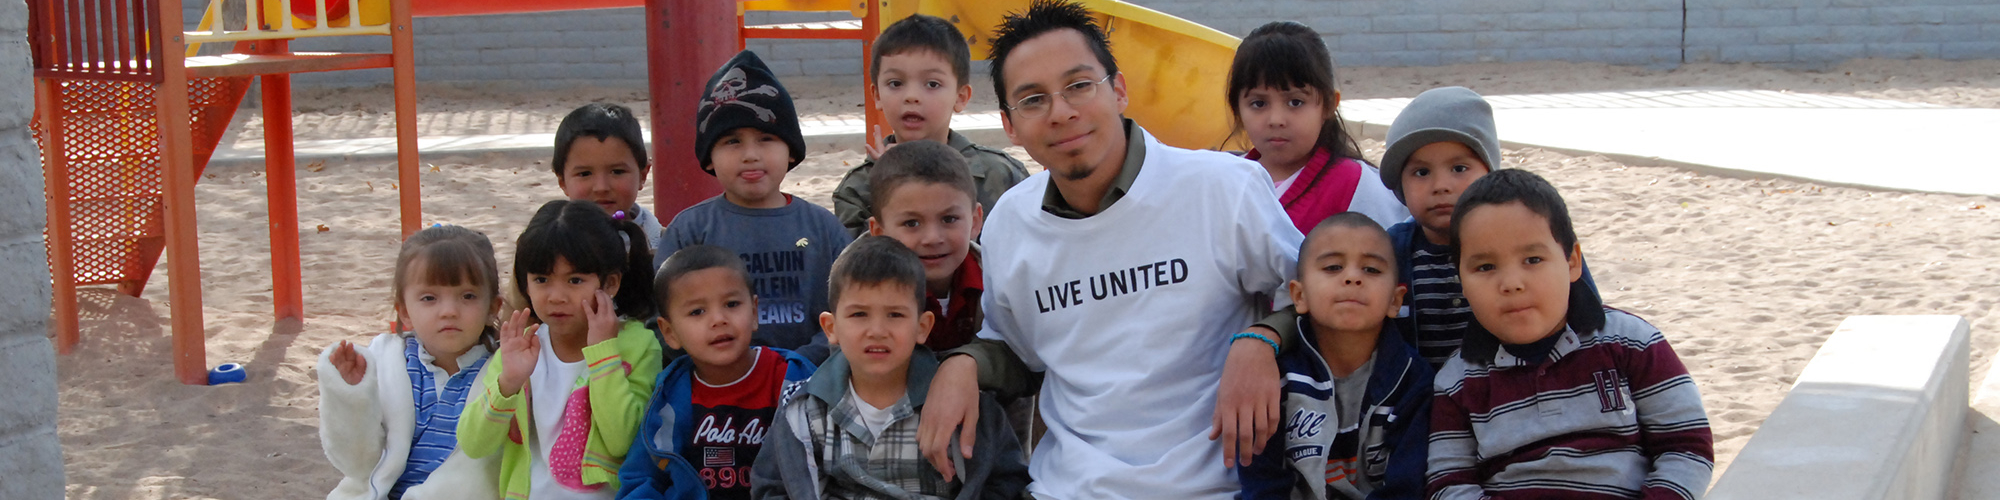 United Way volunteer surrounded by young children on a playground